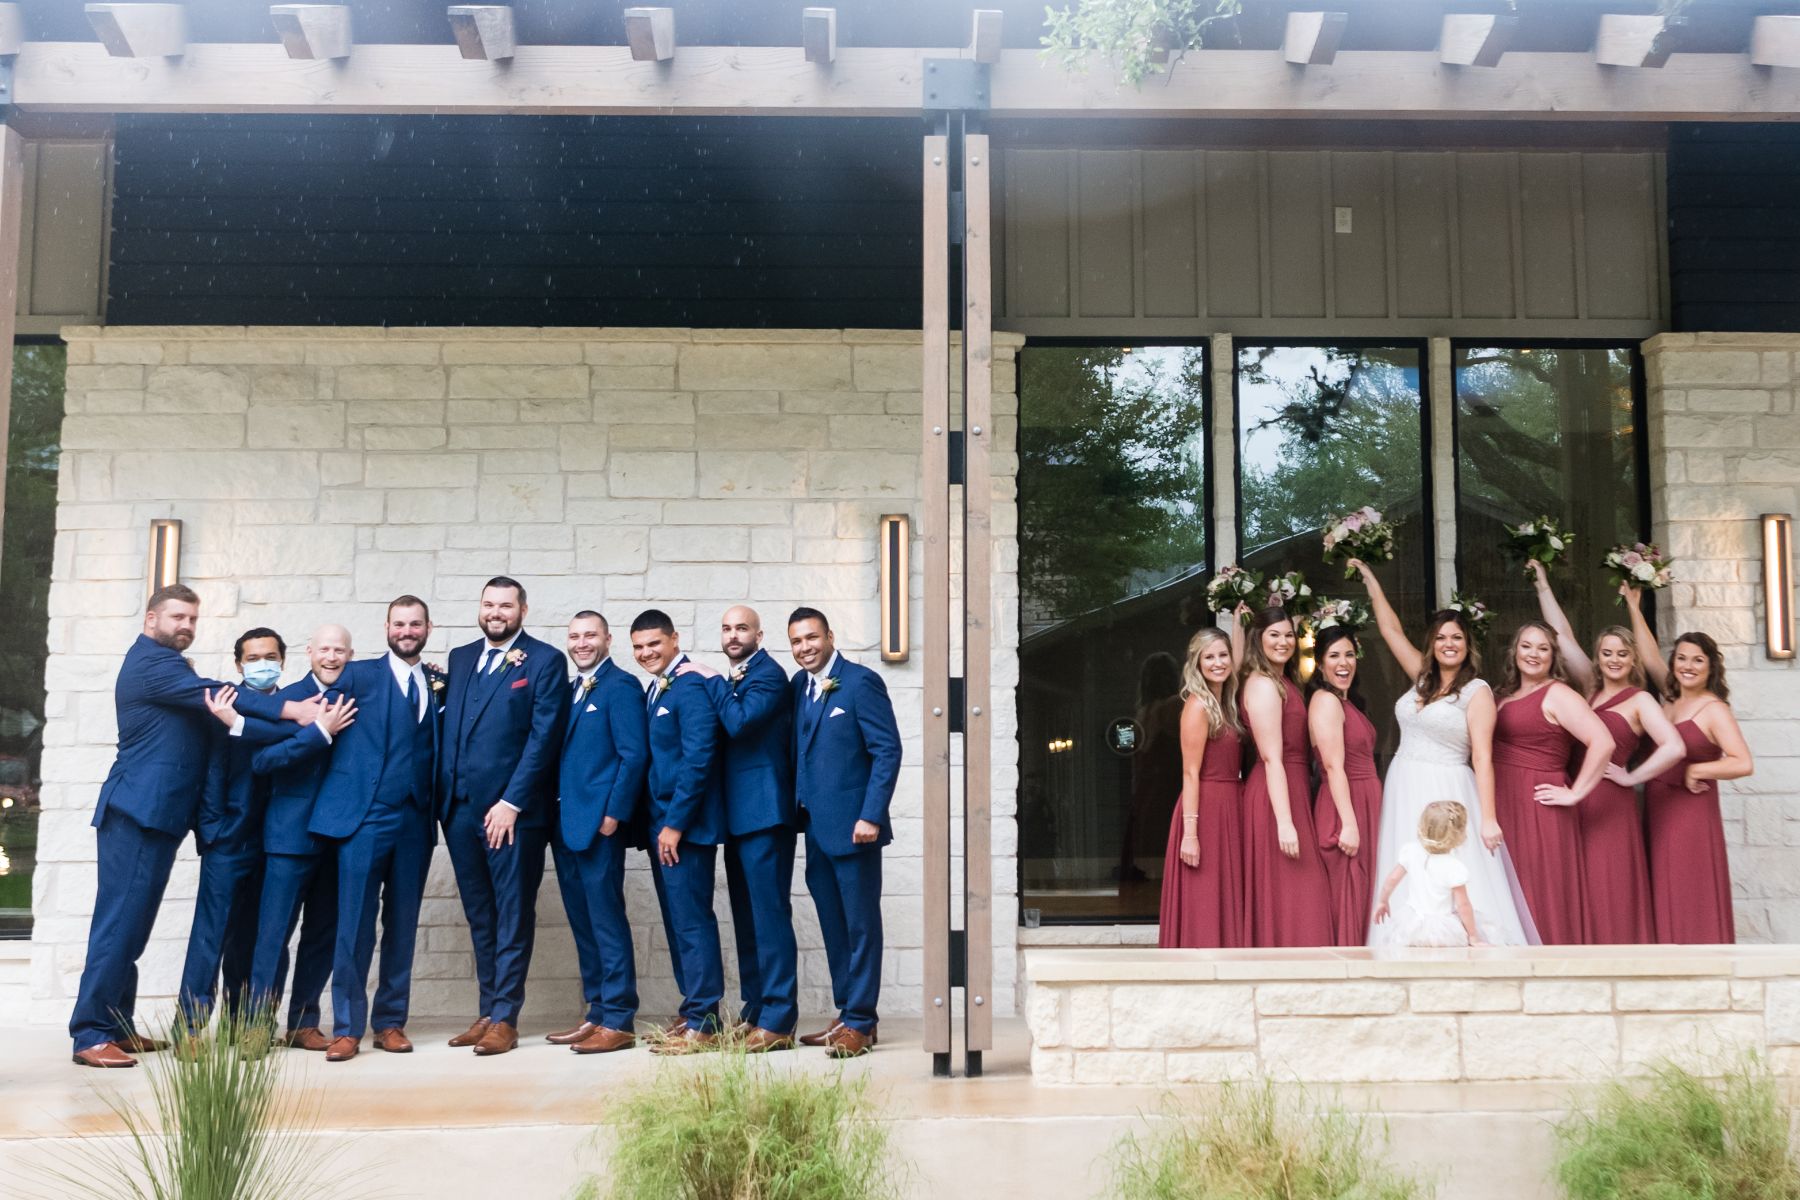 Groom and groomsmen stand on the left side with the bride and bridesmaids, standing on the right side. A limestone building and patio are behind them.